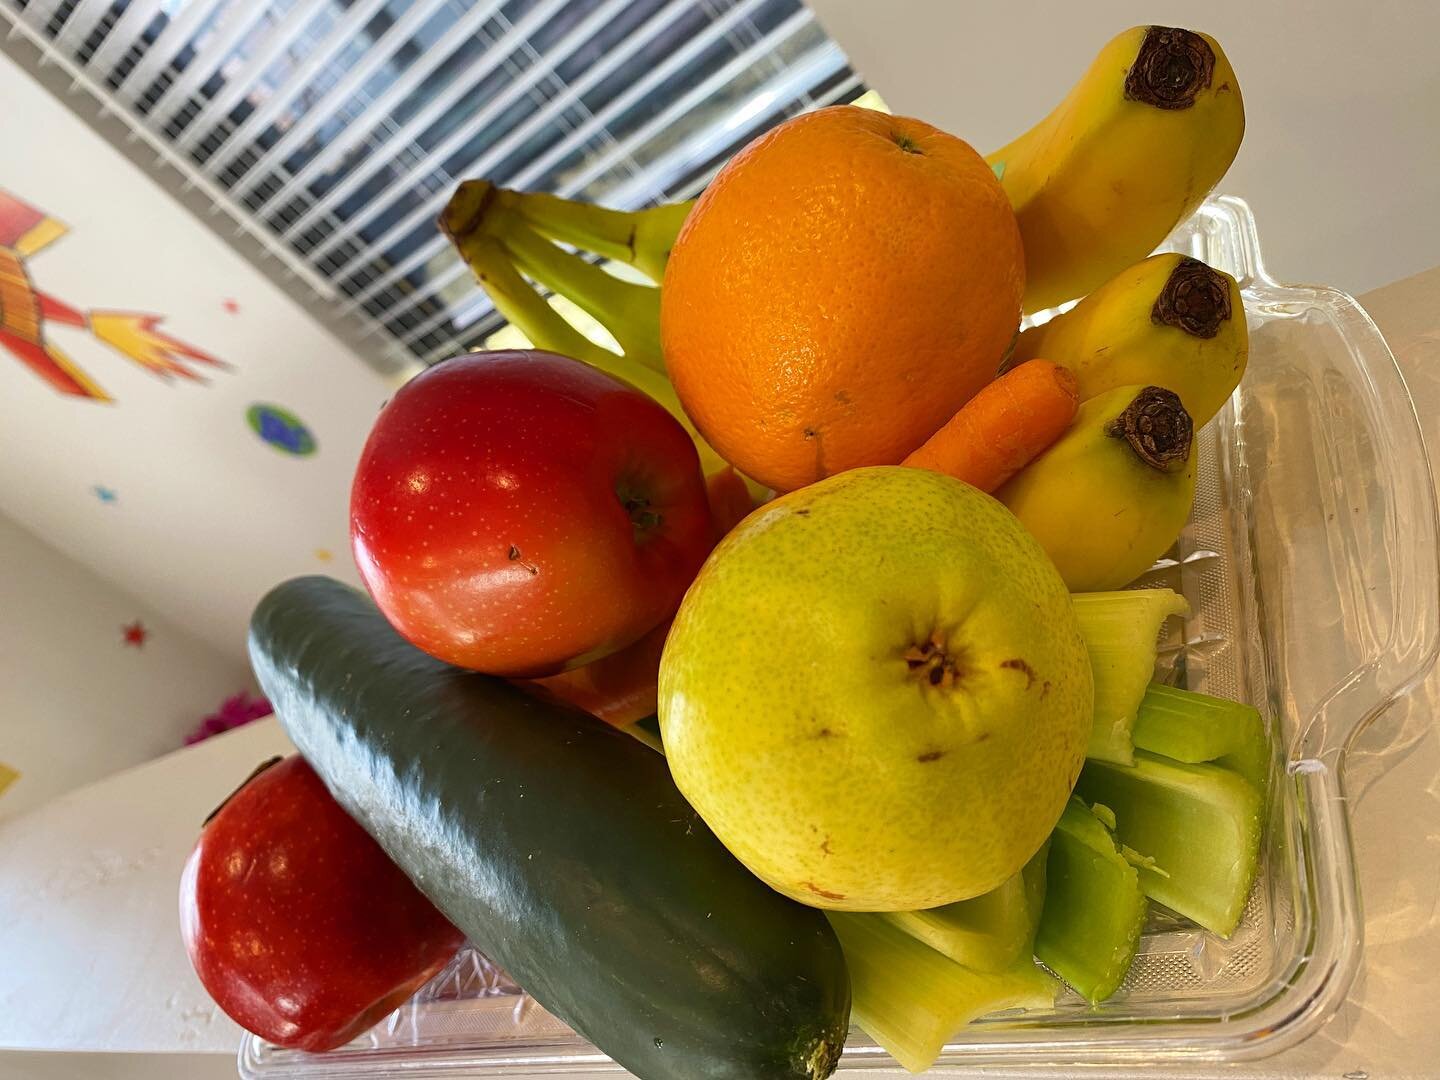 We serve fresh fruits, veggies, protein, and whole grains during our meals as part of the USDA&rsquo;s Child Care Food Program &amp; we try to switch it up seasonally as well. You can see a sample of our menus on our parent portal 🥦🍌🍓🍎🍏🥬🥑🍍🍅?